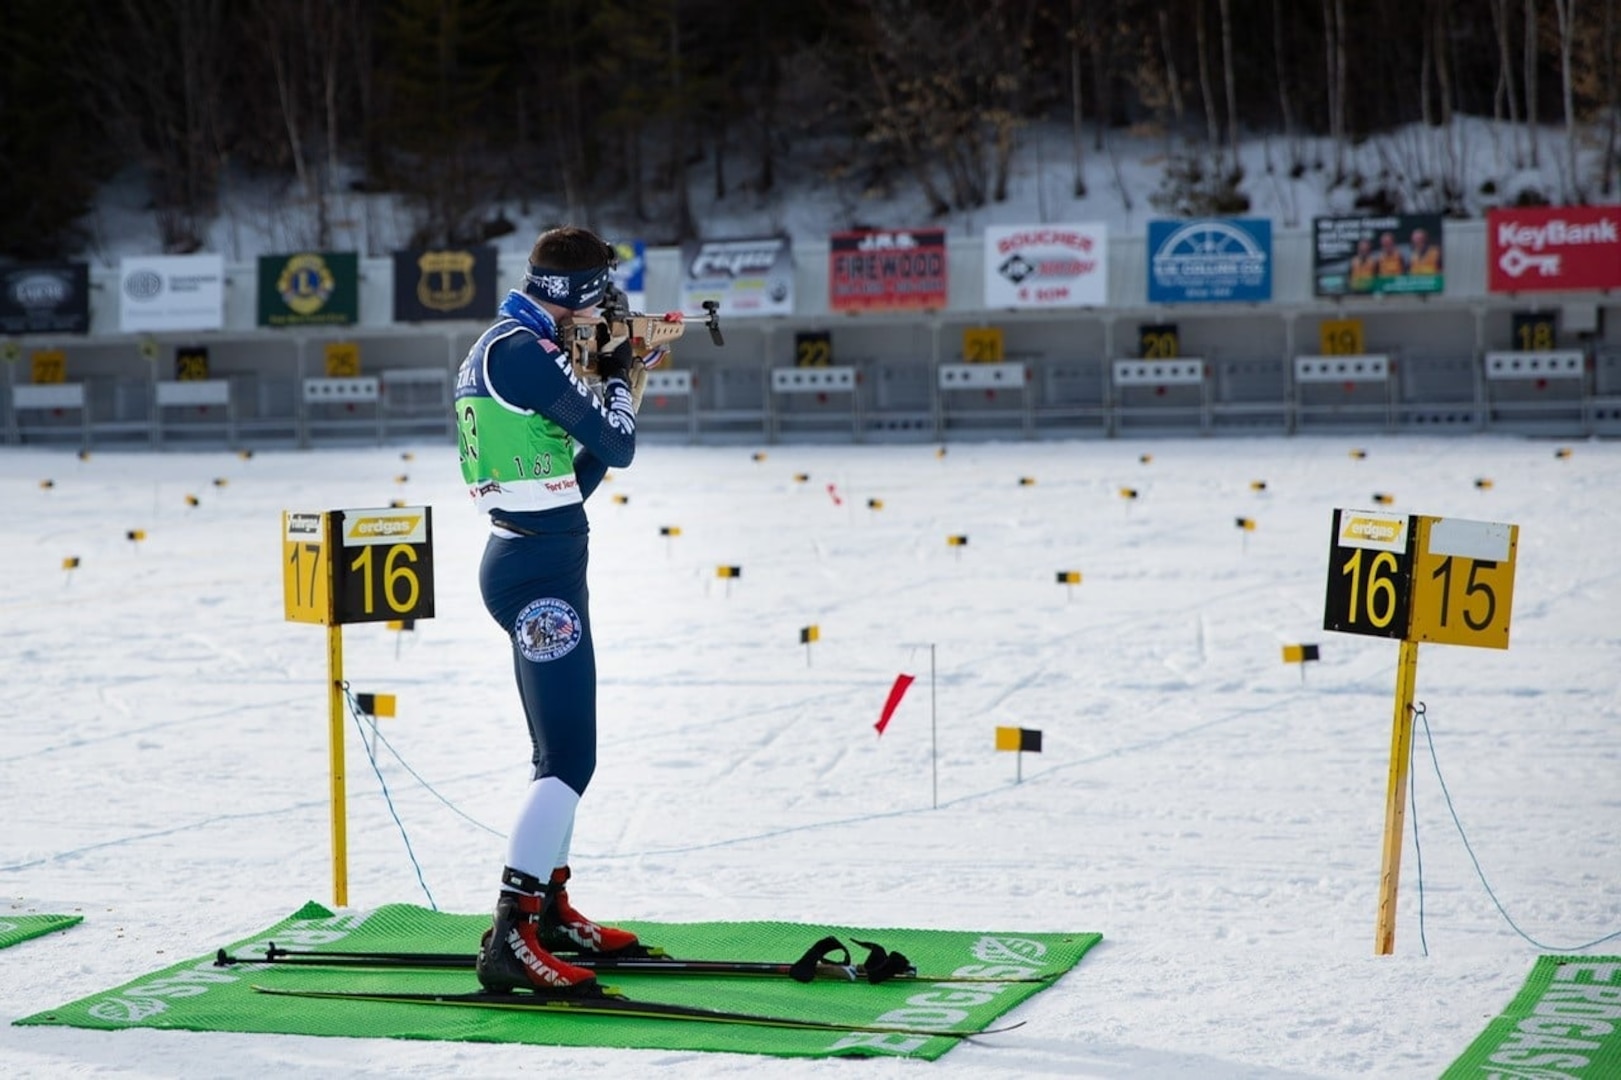 Spc. Thomas Echelberger shoots at the Biathlon Spring Fling on March 3, 2021, at Fort Kent, Maine. Echelberger placed sixth out of 35 competitors.